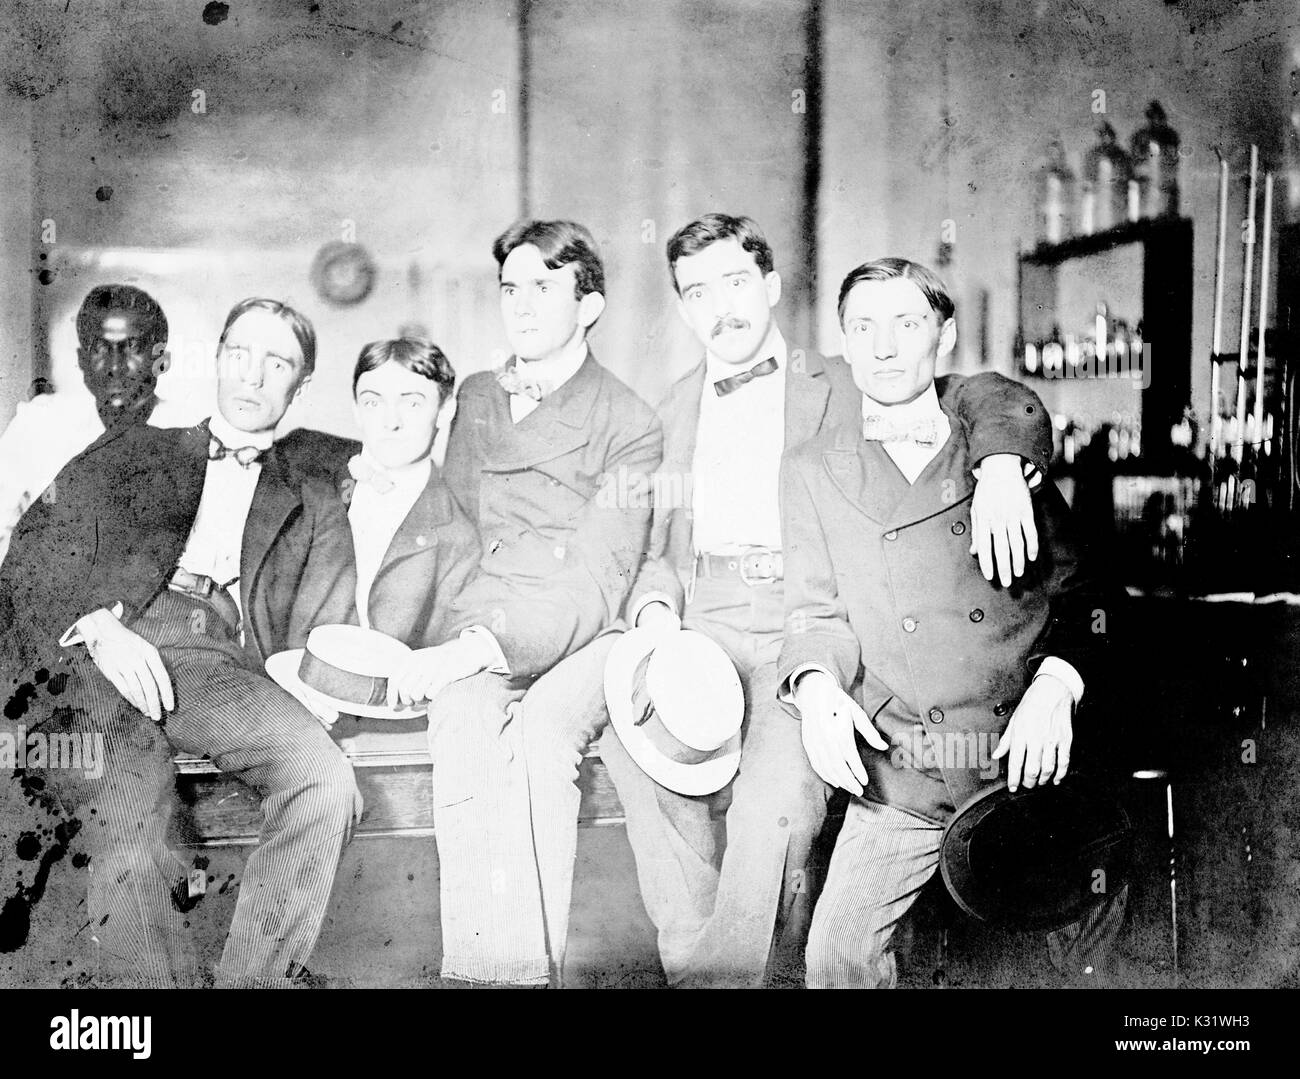 Group photograph of 1901 Johns Hopkins University PhDs in a laboratory, with arms on each others' shoulders, making funny facial expressions and holding skimmer hats, with one African-American man visible in the background, 1901. Stock Photo